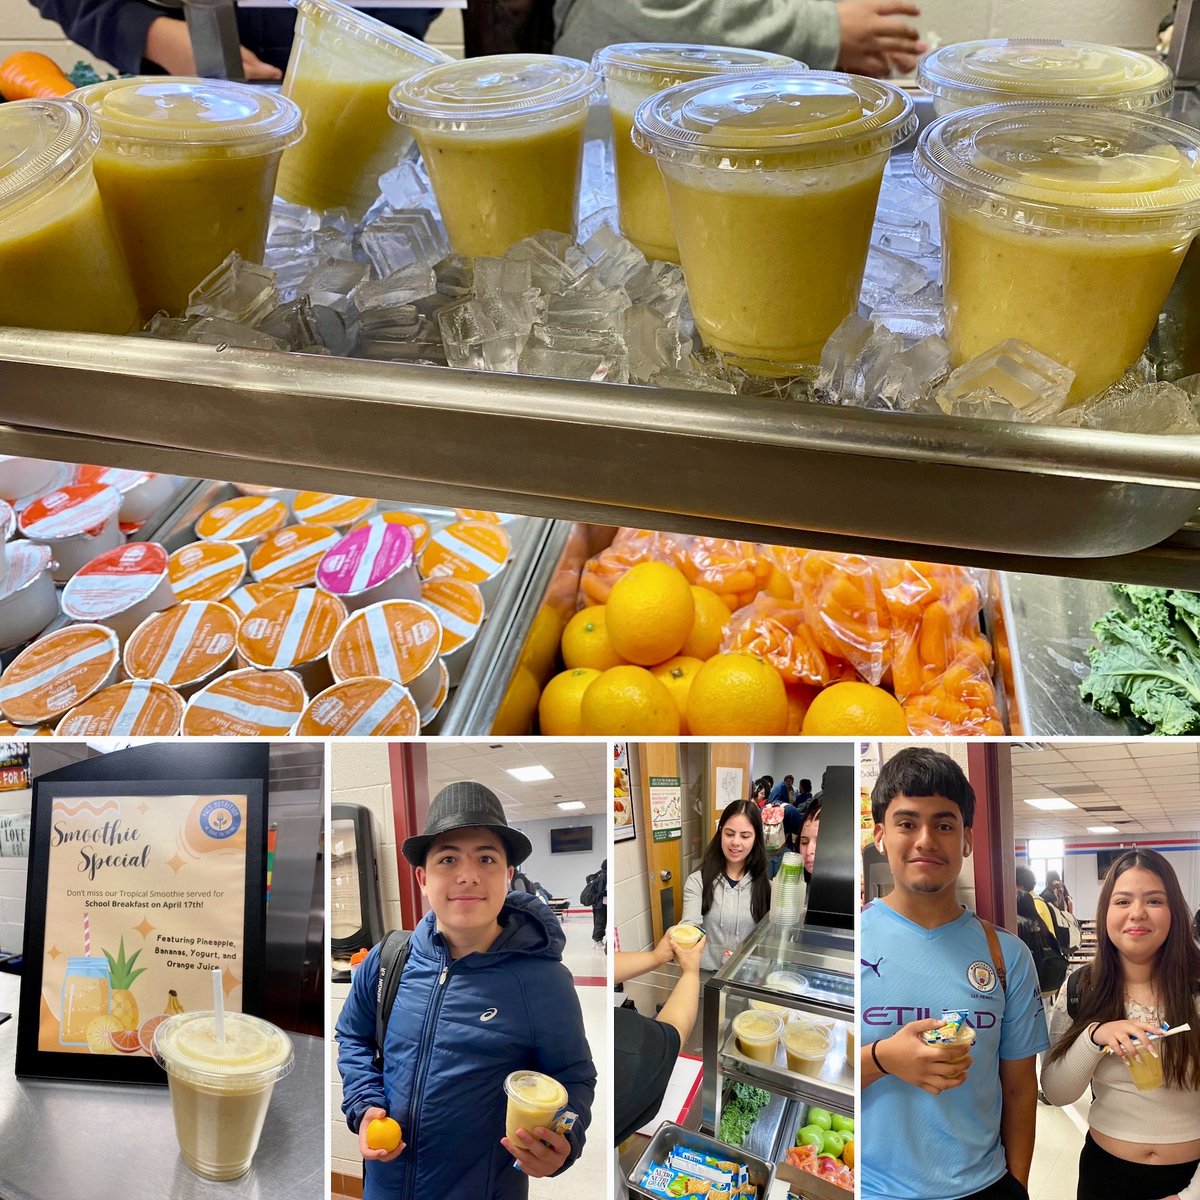 It’s never too early to start getting in the mood for summer! The temperatures outside feels like summer, so it’s only right the food inside tastes like summer! Middle and high school students enjoyed our Tropical Smoothie for #SchoolBreakfast today! #EatTheRainbowWednesdays